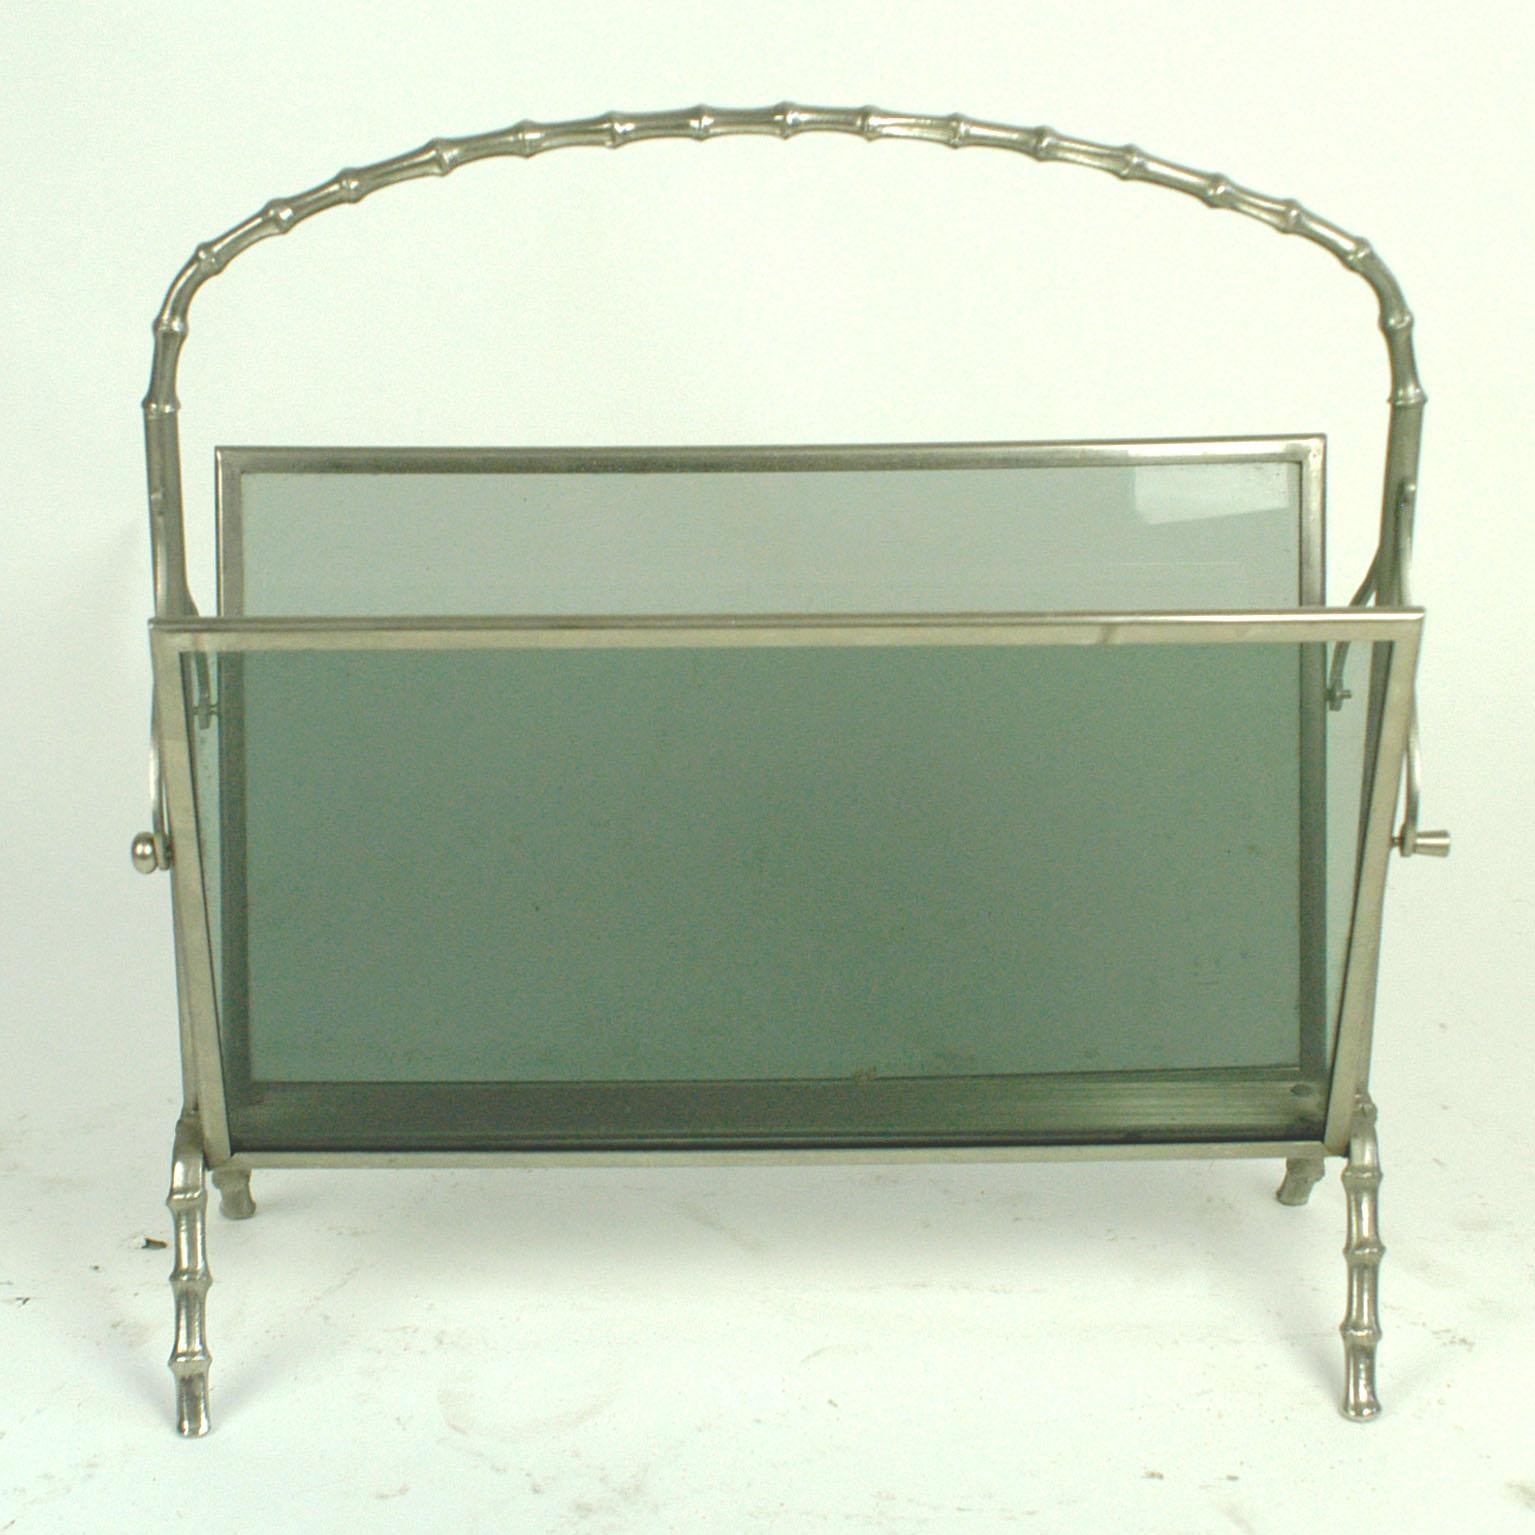 Elegant silvered brass magazine rack by Maison Baguès, Paris, France with bamboo shaped handle and legs, smoked grey glass. Manufactured circa 1960.